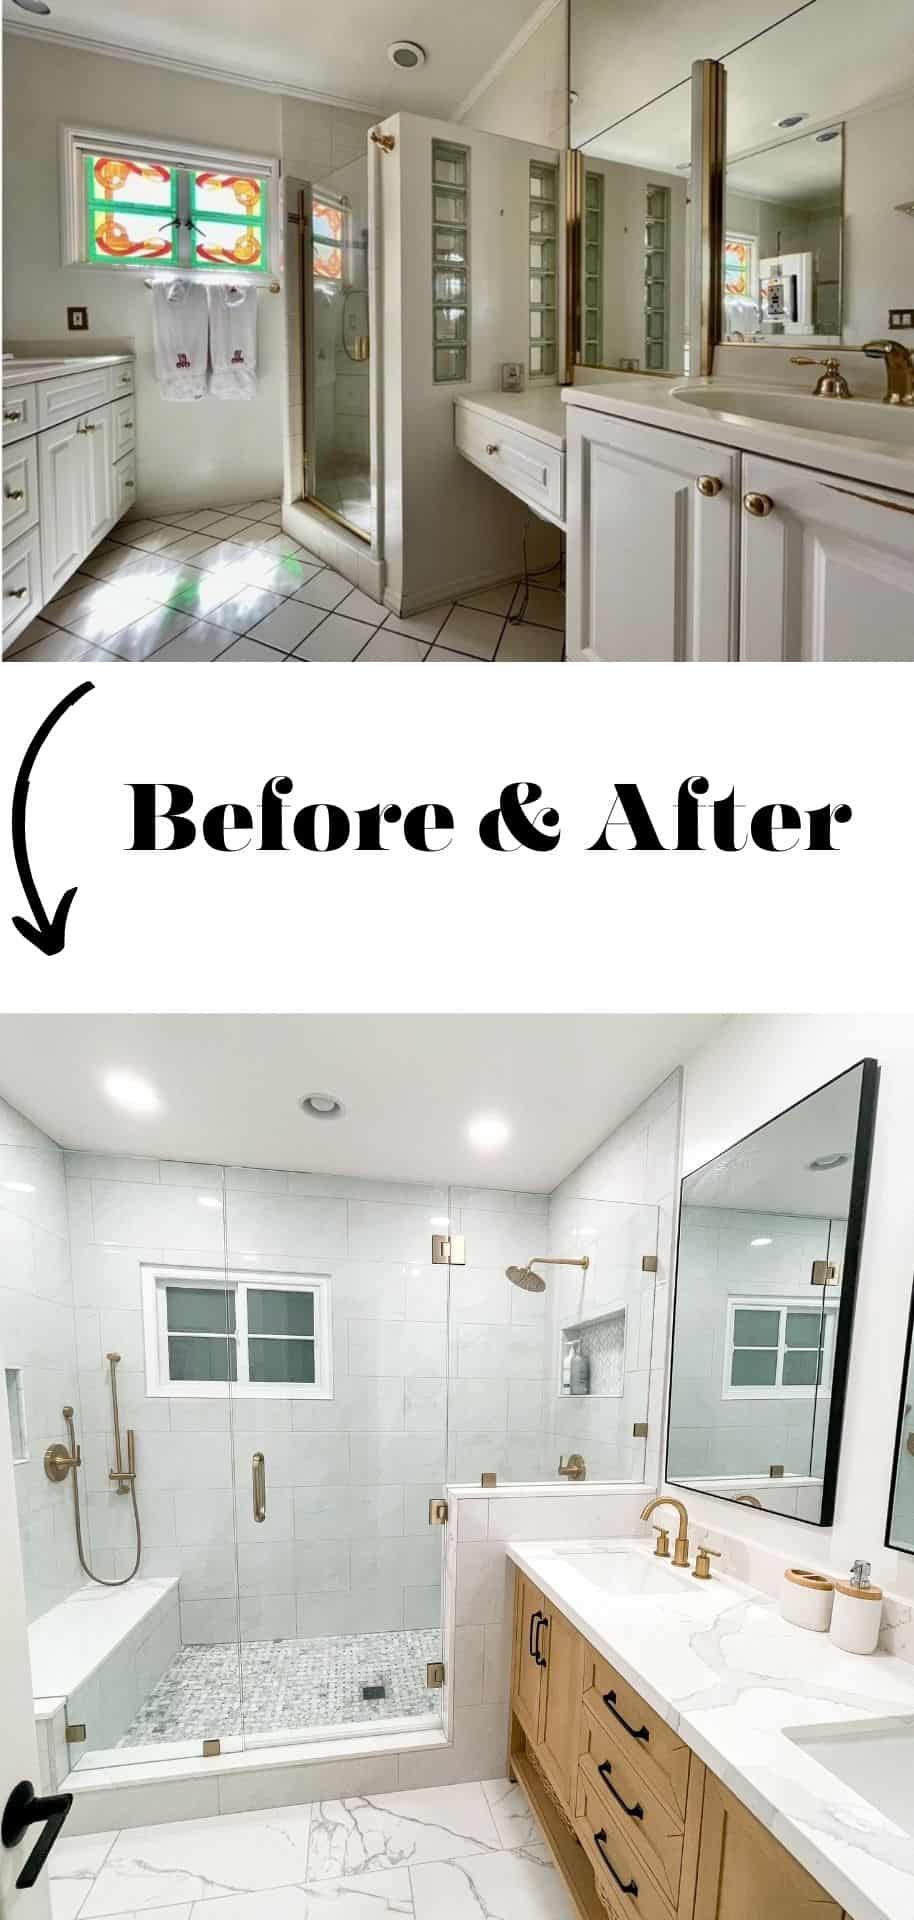 1960s bathroom remodel before and after